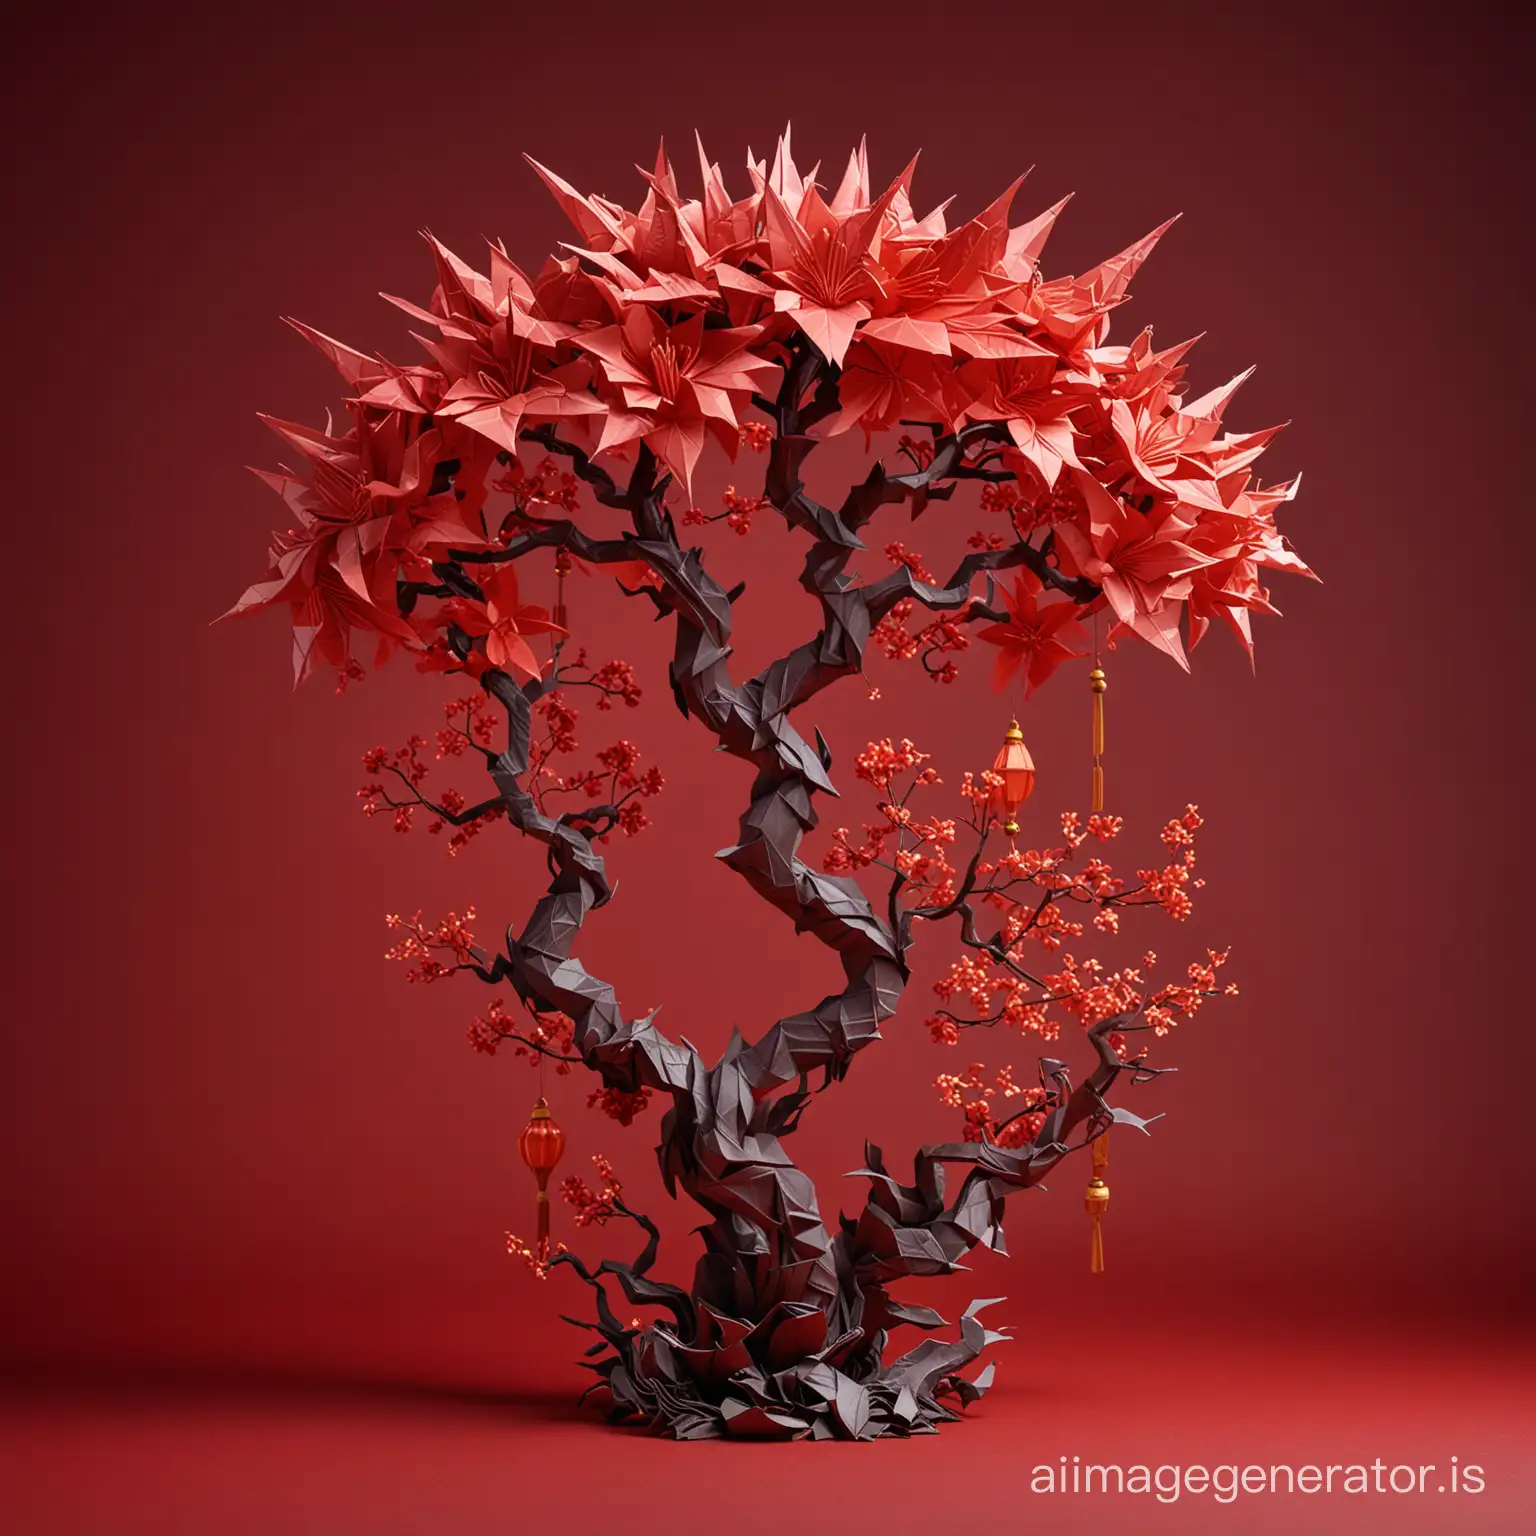 Chinese-Graphic-Design-Red-Origami-Tree-with-Dragon-and-Paper-Lanterns